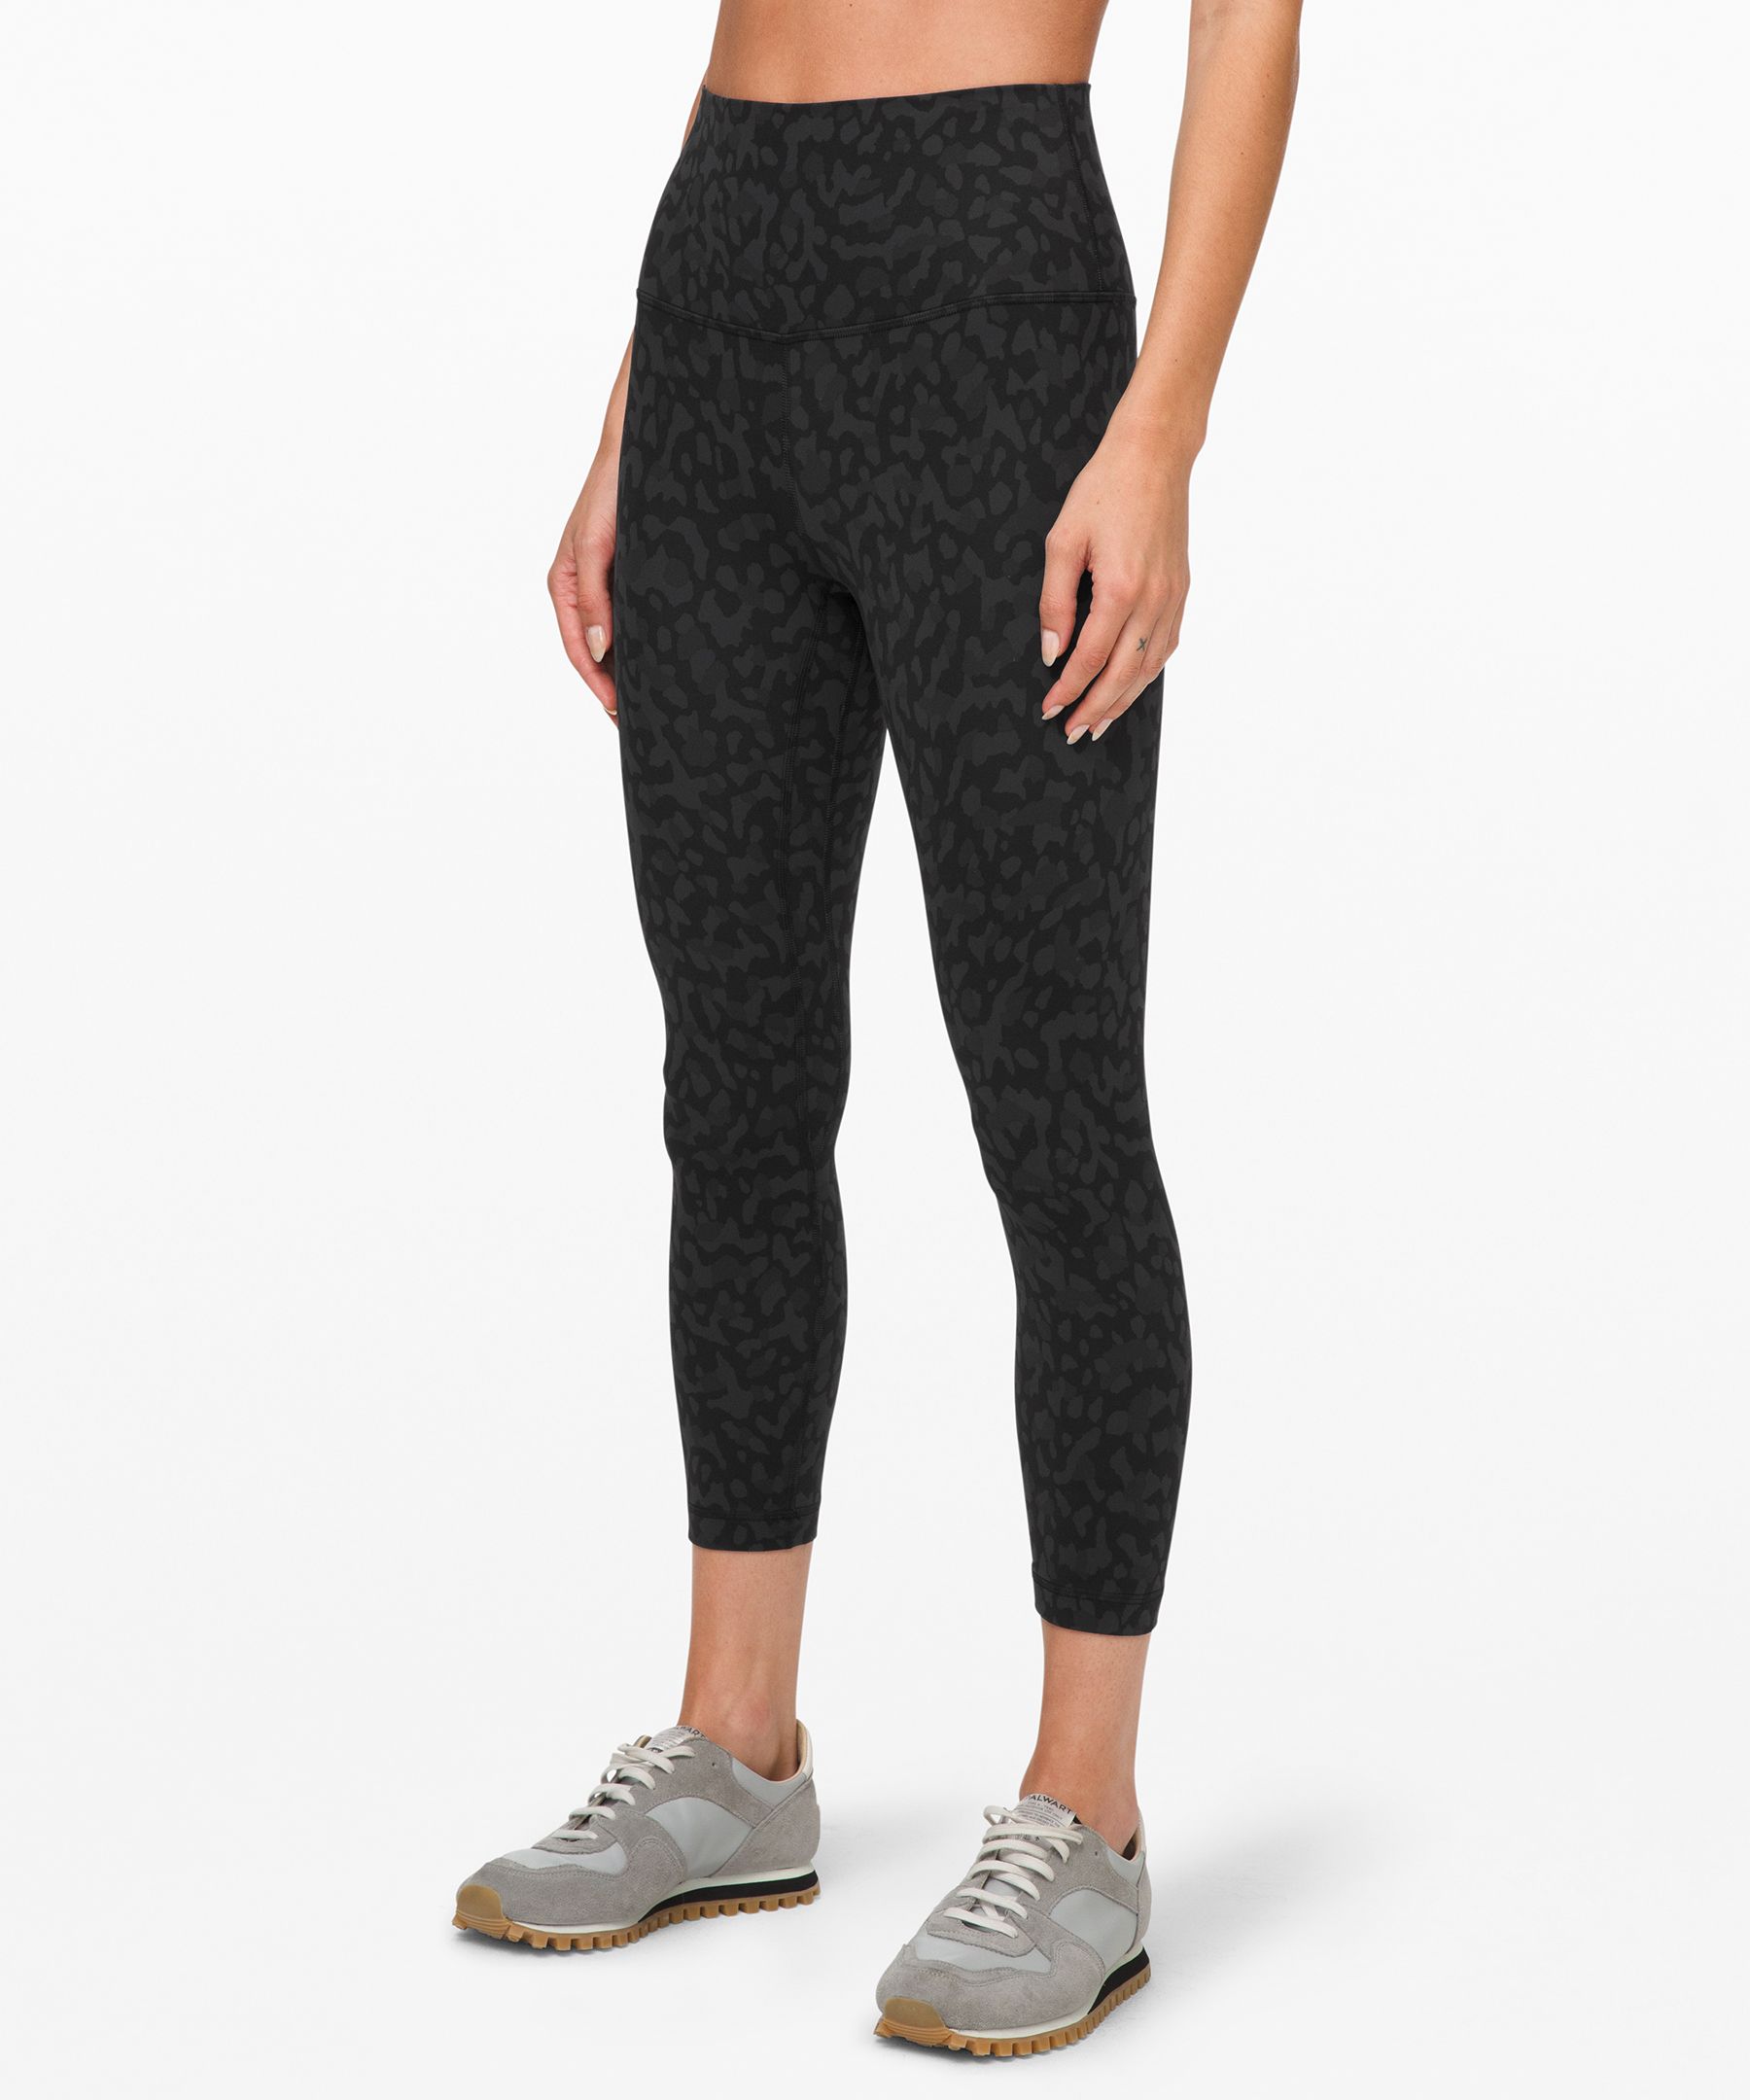 Lululemon Align Crop *21 - Incognito Camo Multi Grey (First